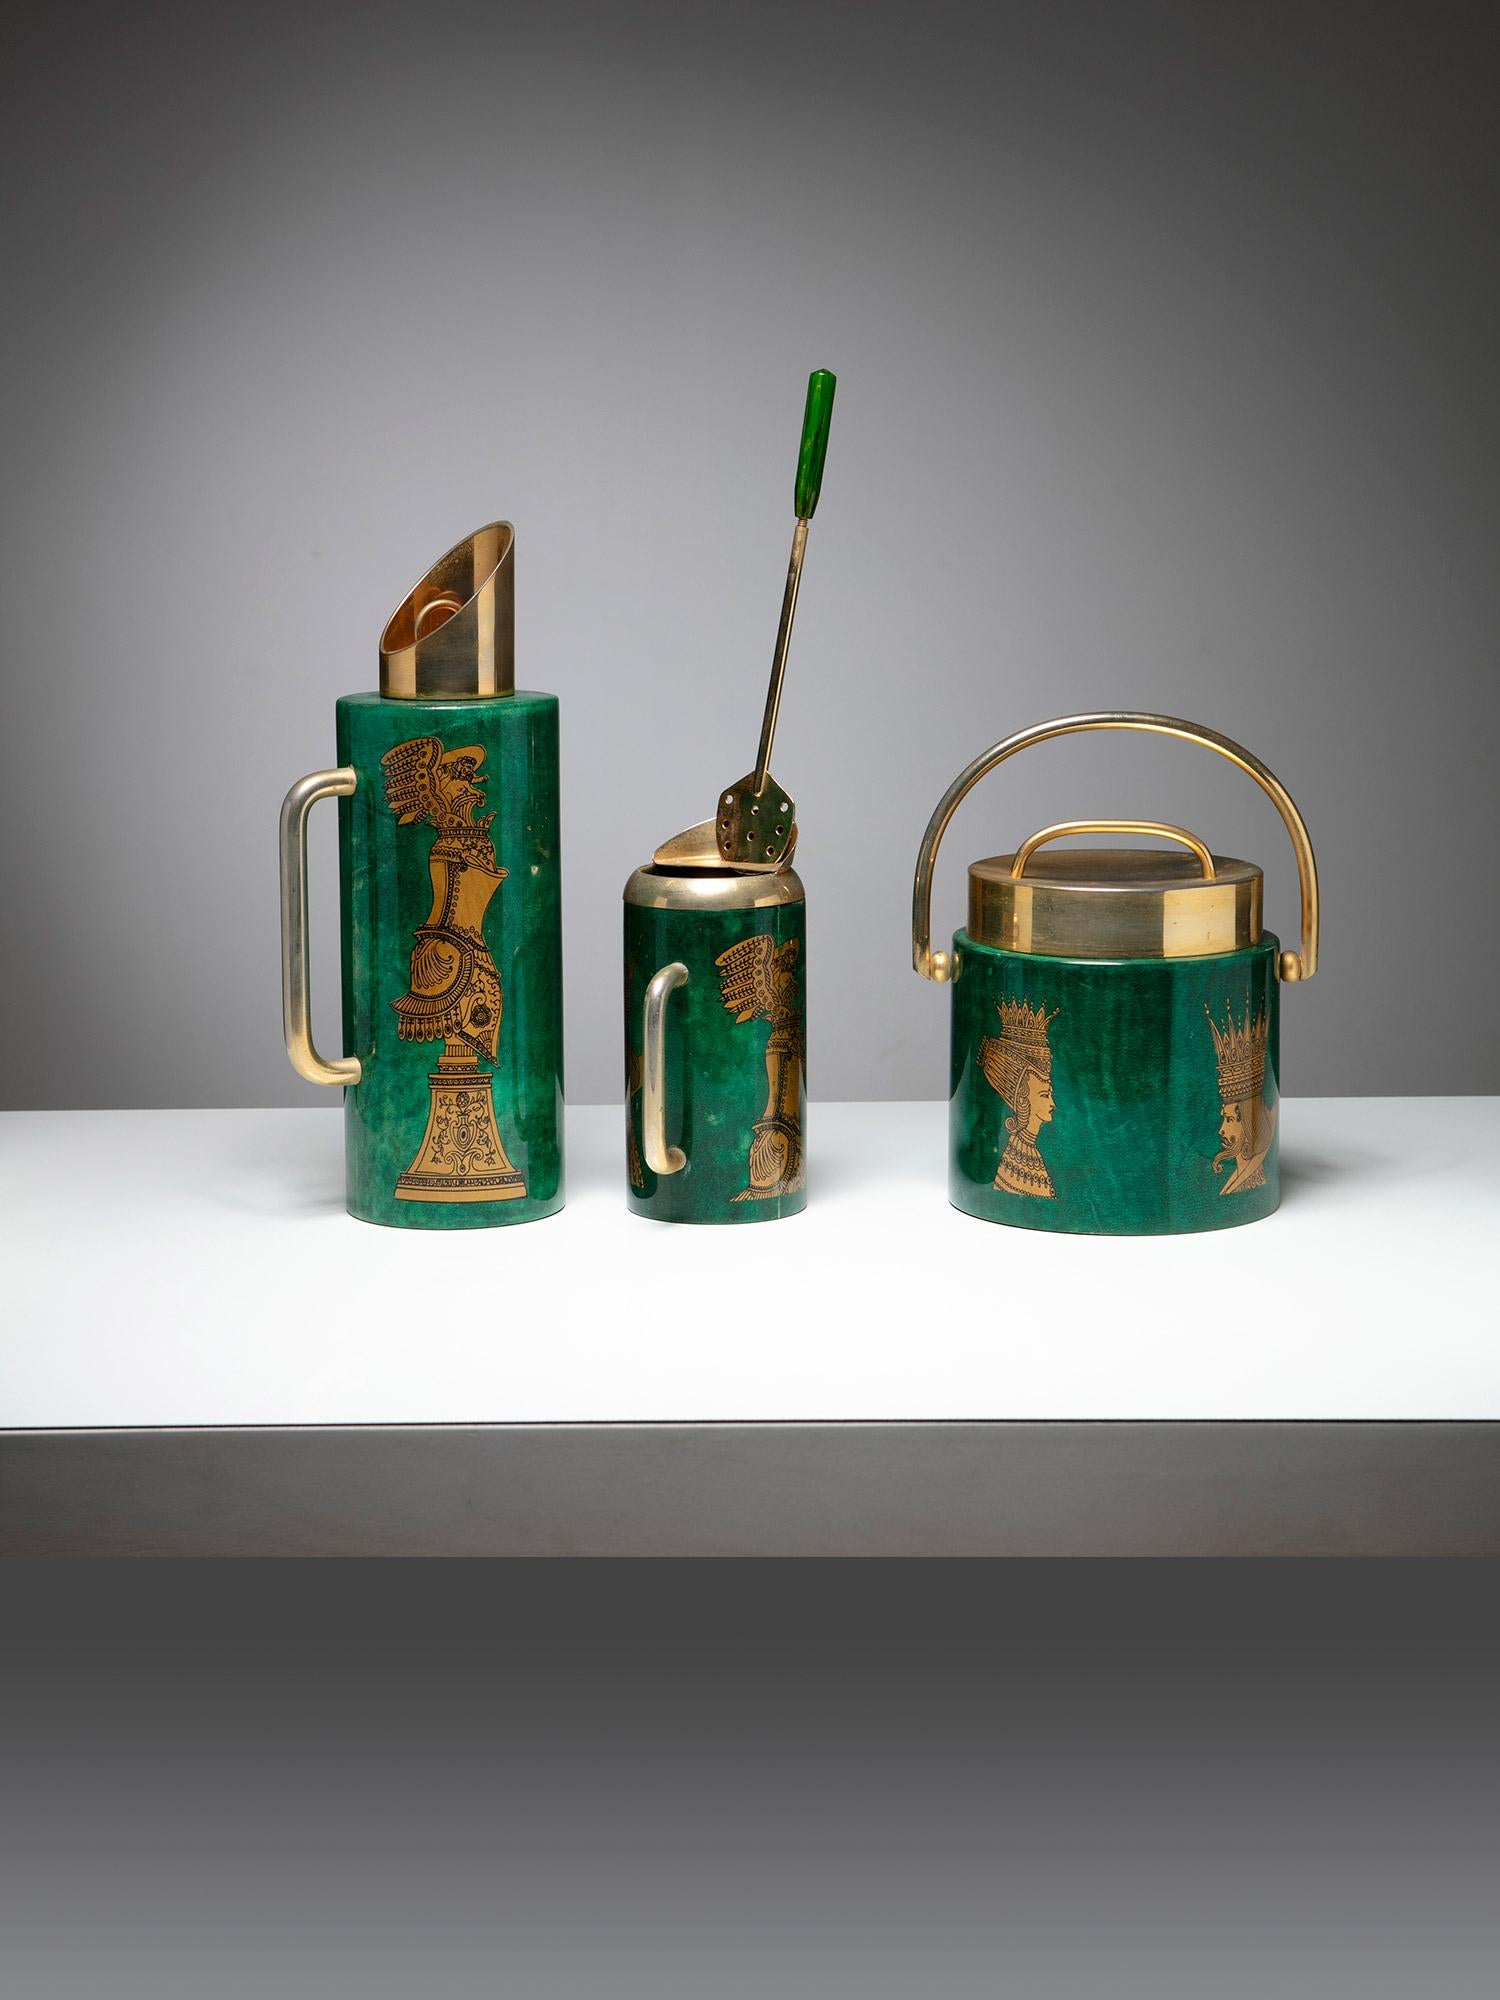 Rare bar set by Aldo Tura for Macabo.
Malachite finish background with gold decorations and brass details.
Size refers to the taller piece.